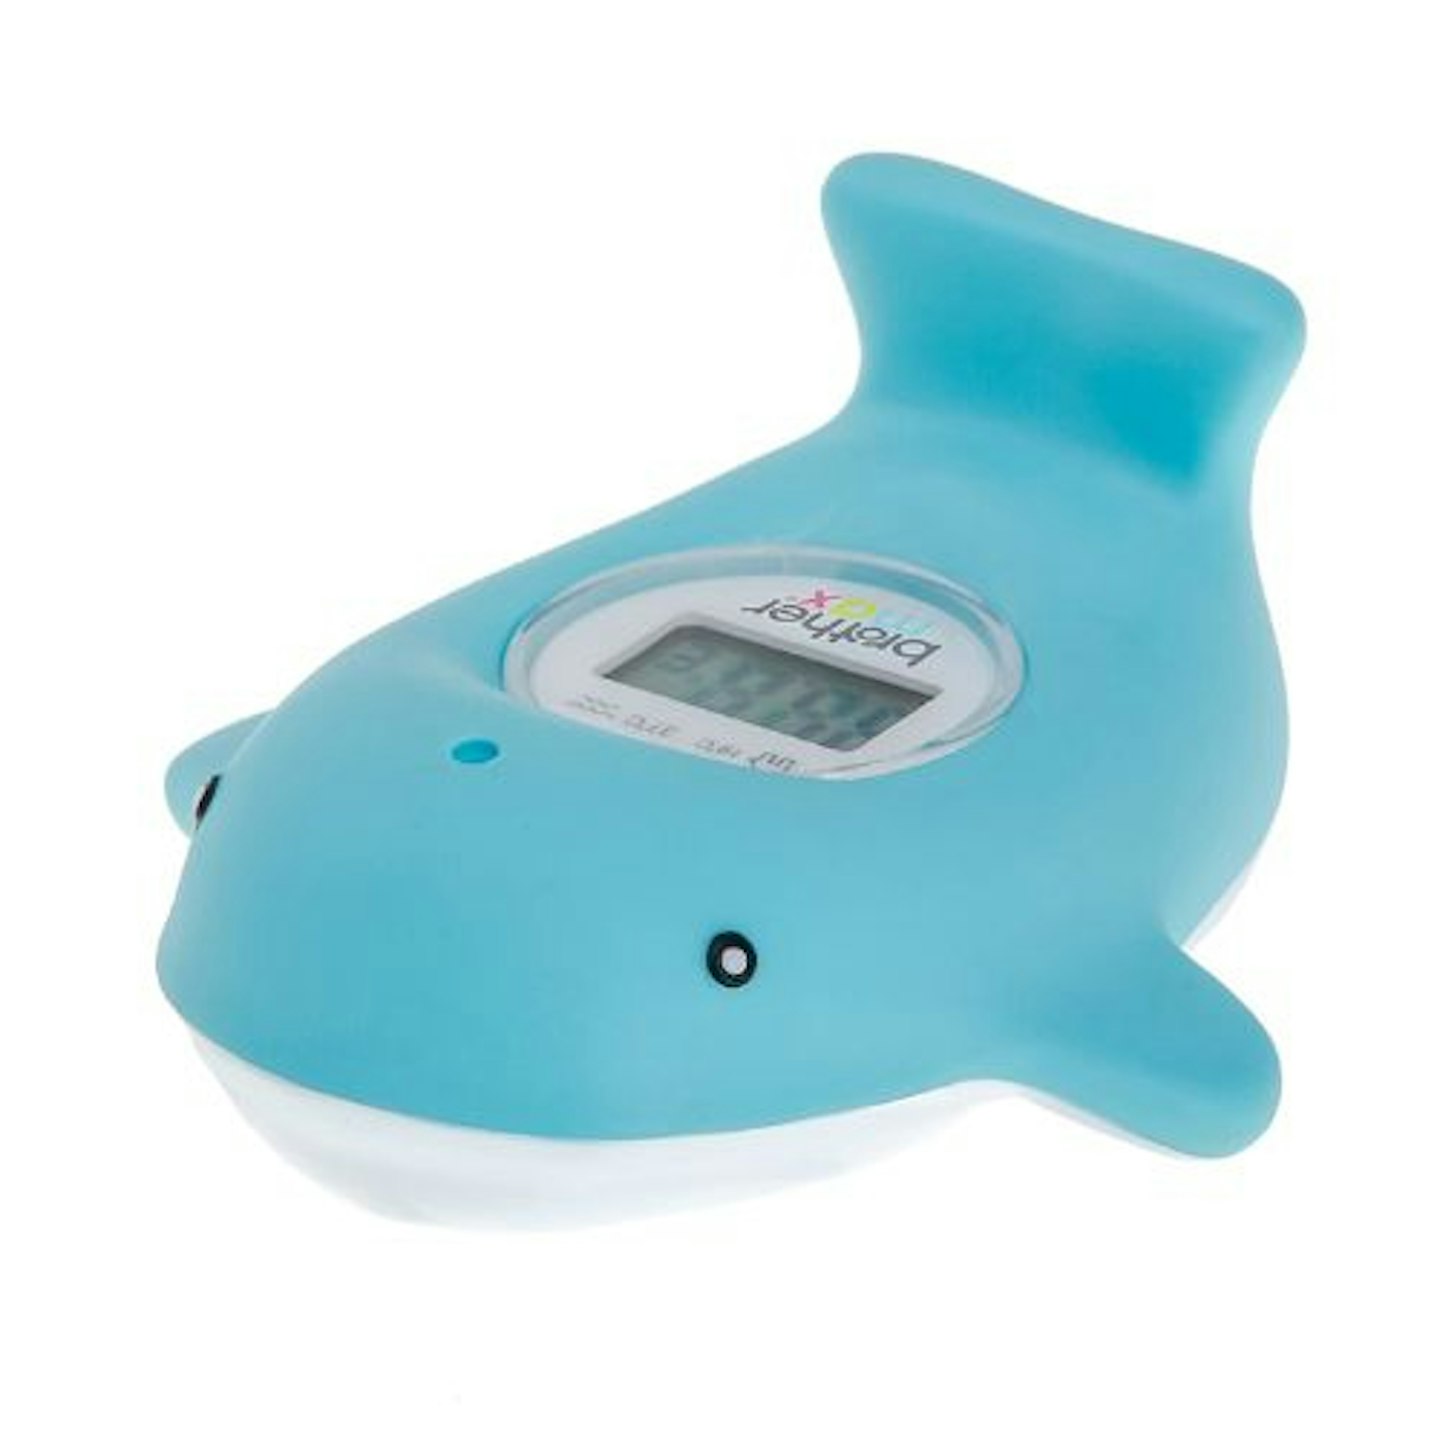 https://images.bauerhosting.com/affiliates/sites/12/motherandbaby/2022/08/Brother-70964BL2-Max-Whale-Digital-Bath-and-Room-Thermometer.jpg?auto=format&w=1440&q=80